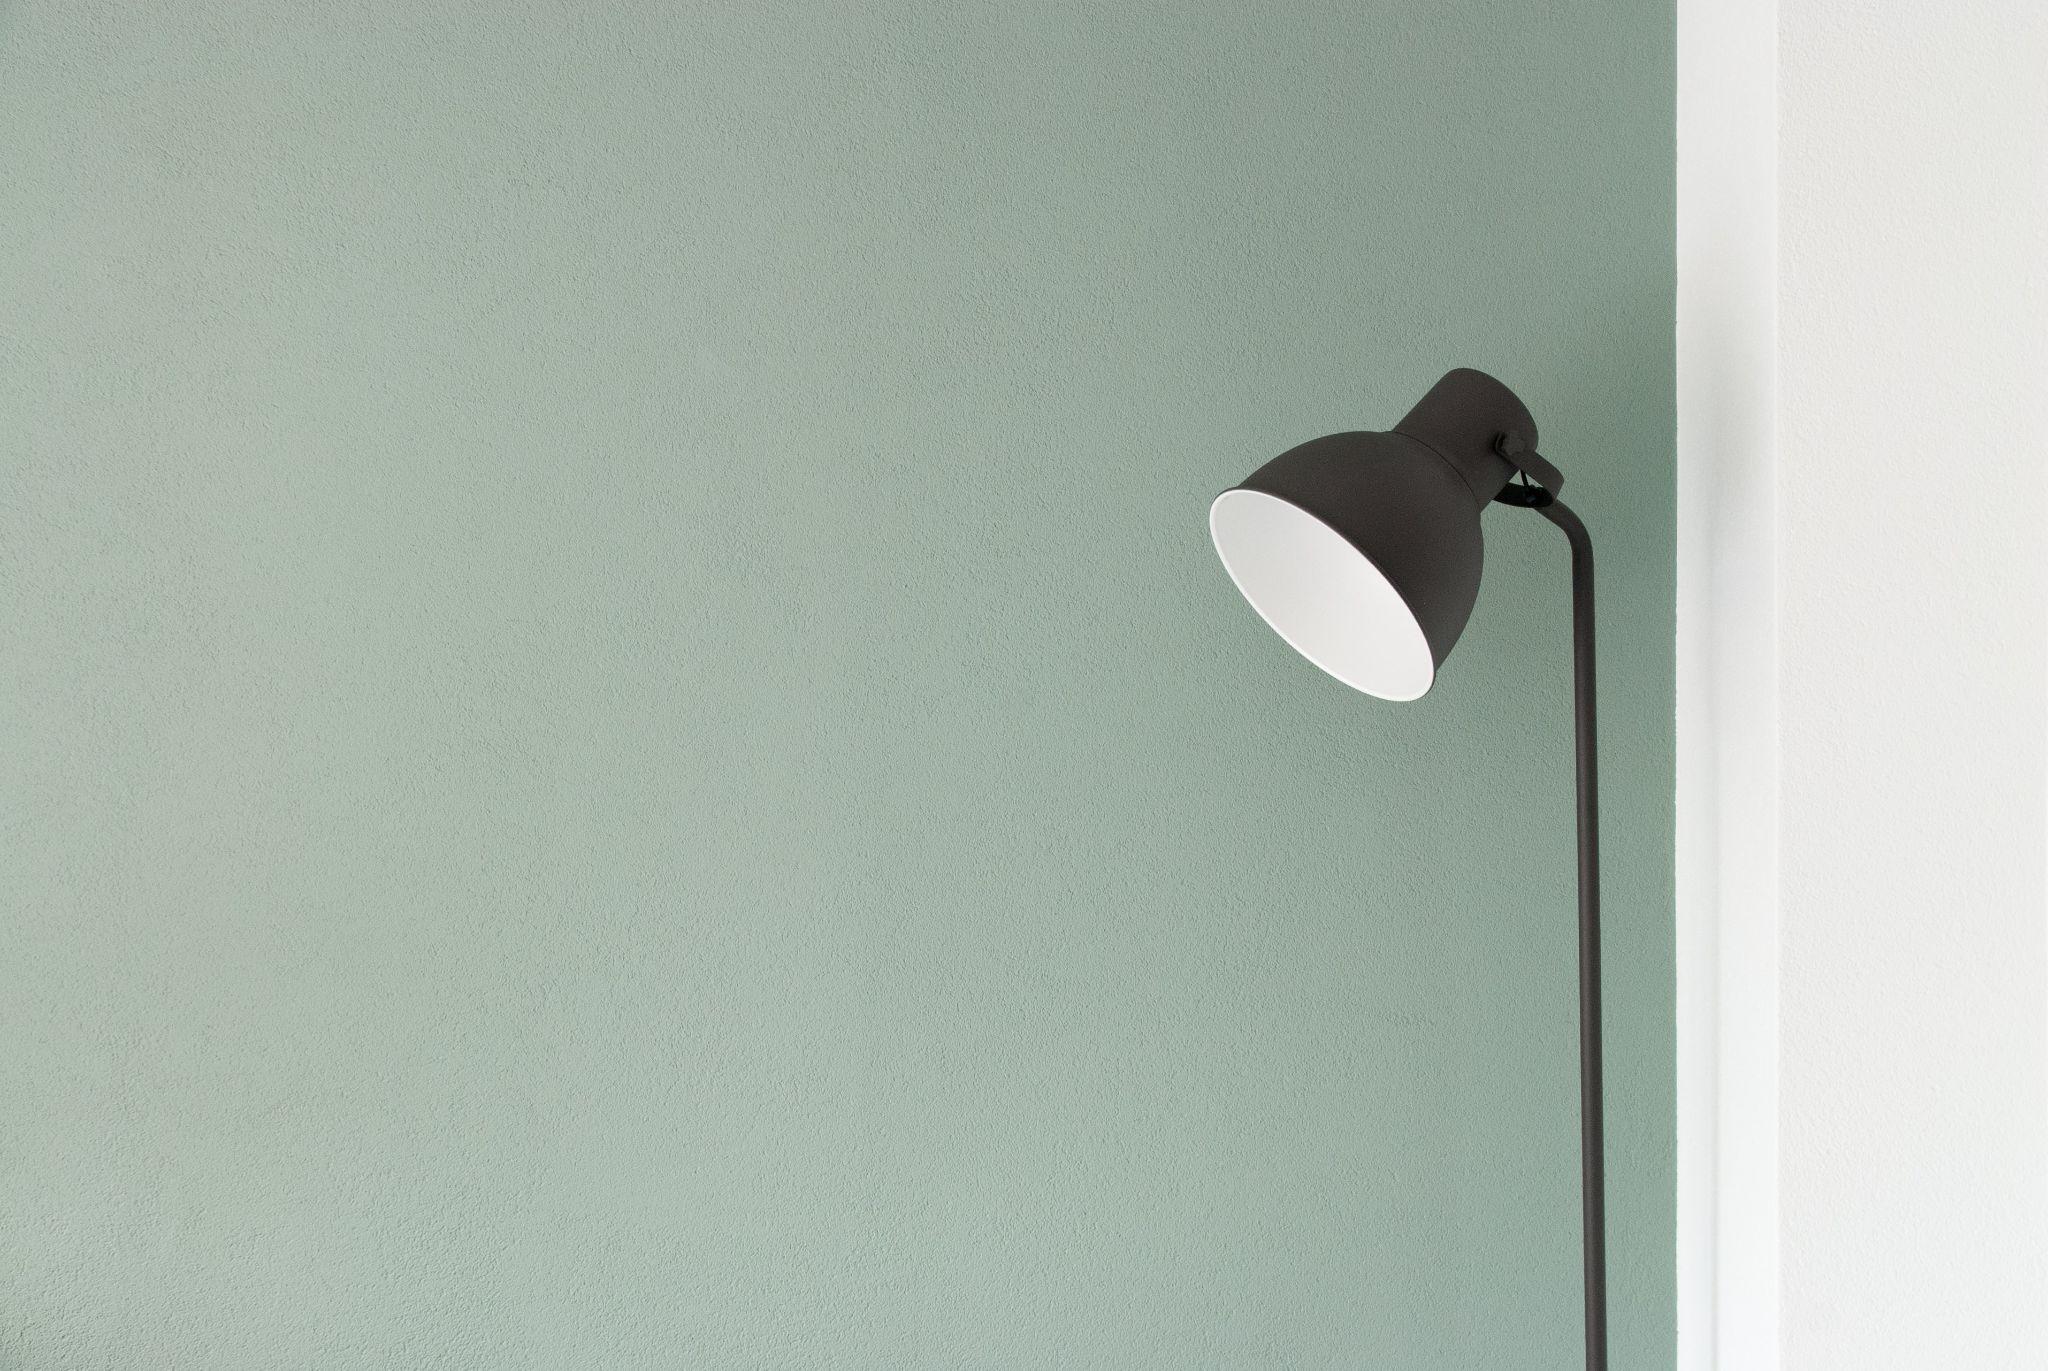 green wall paint and lamp. choosing right color help to make home feel relaxing